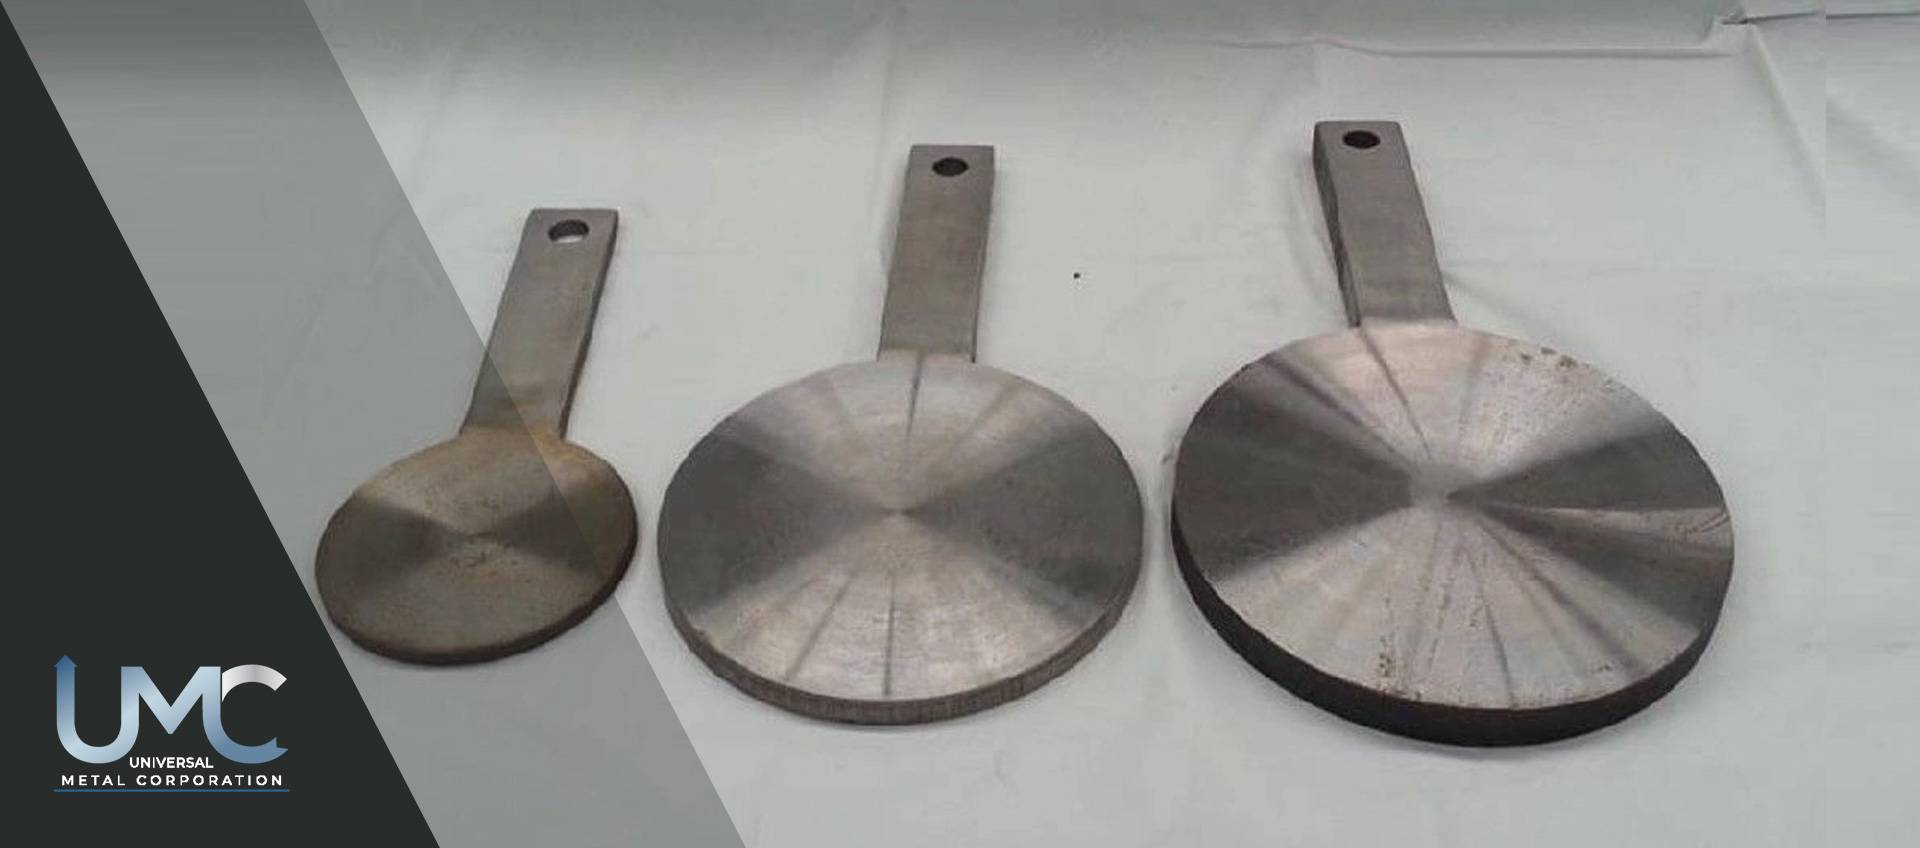 INCONEL SPADES AND RING SPACERS